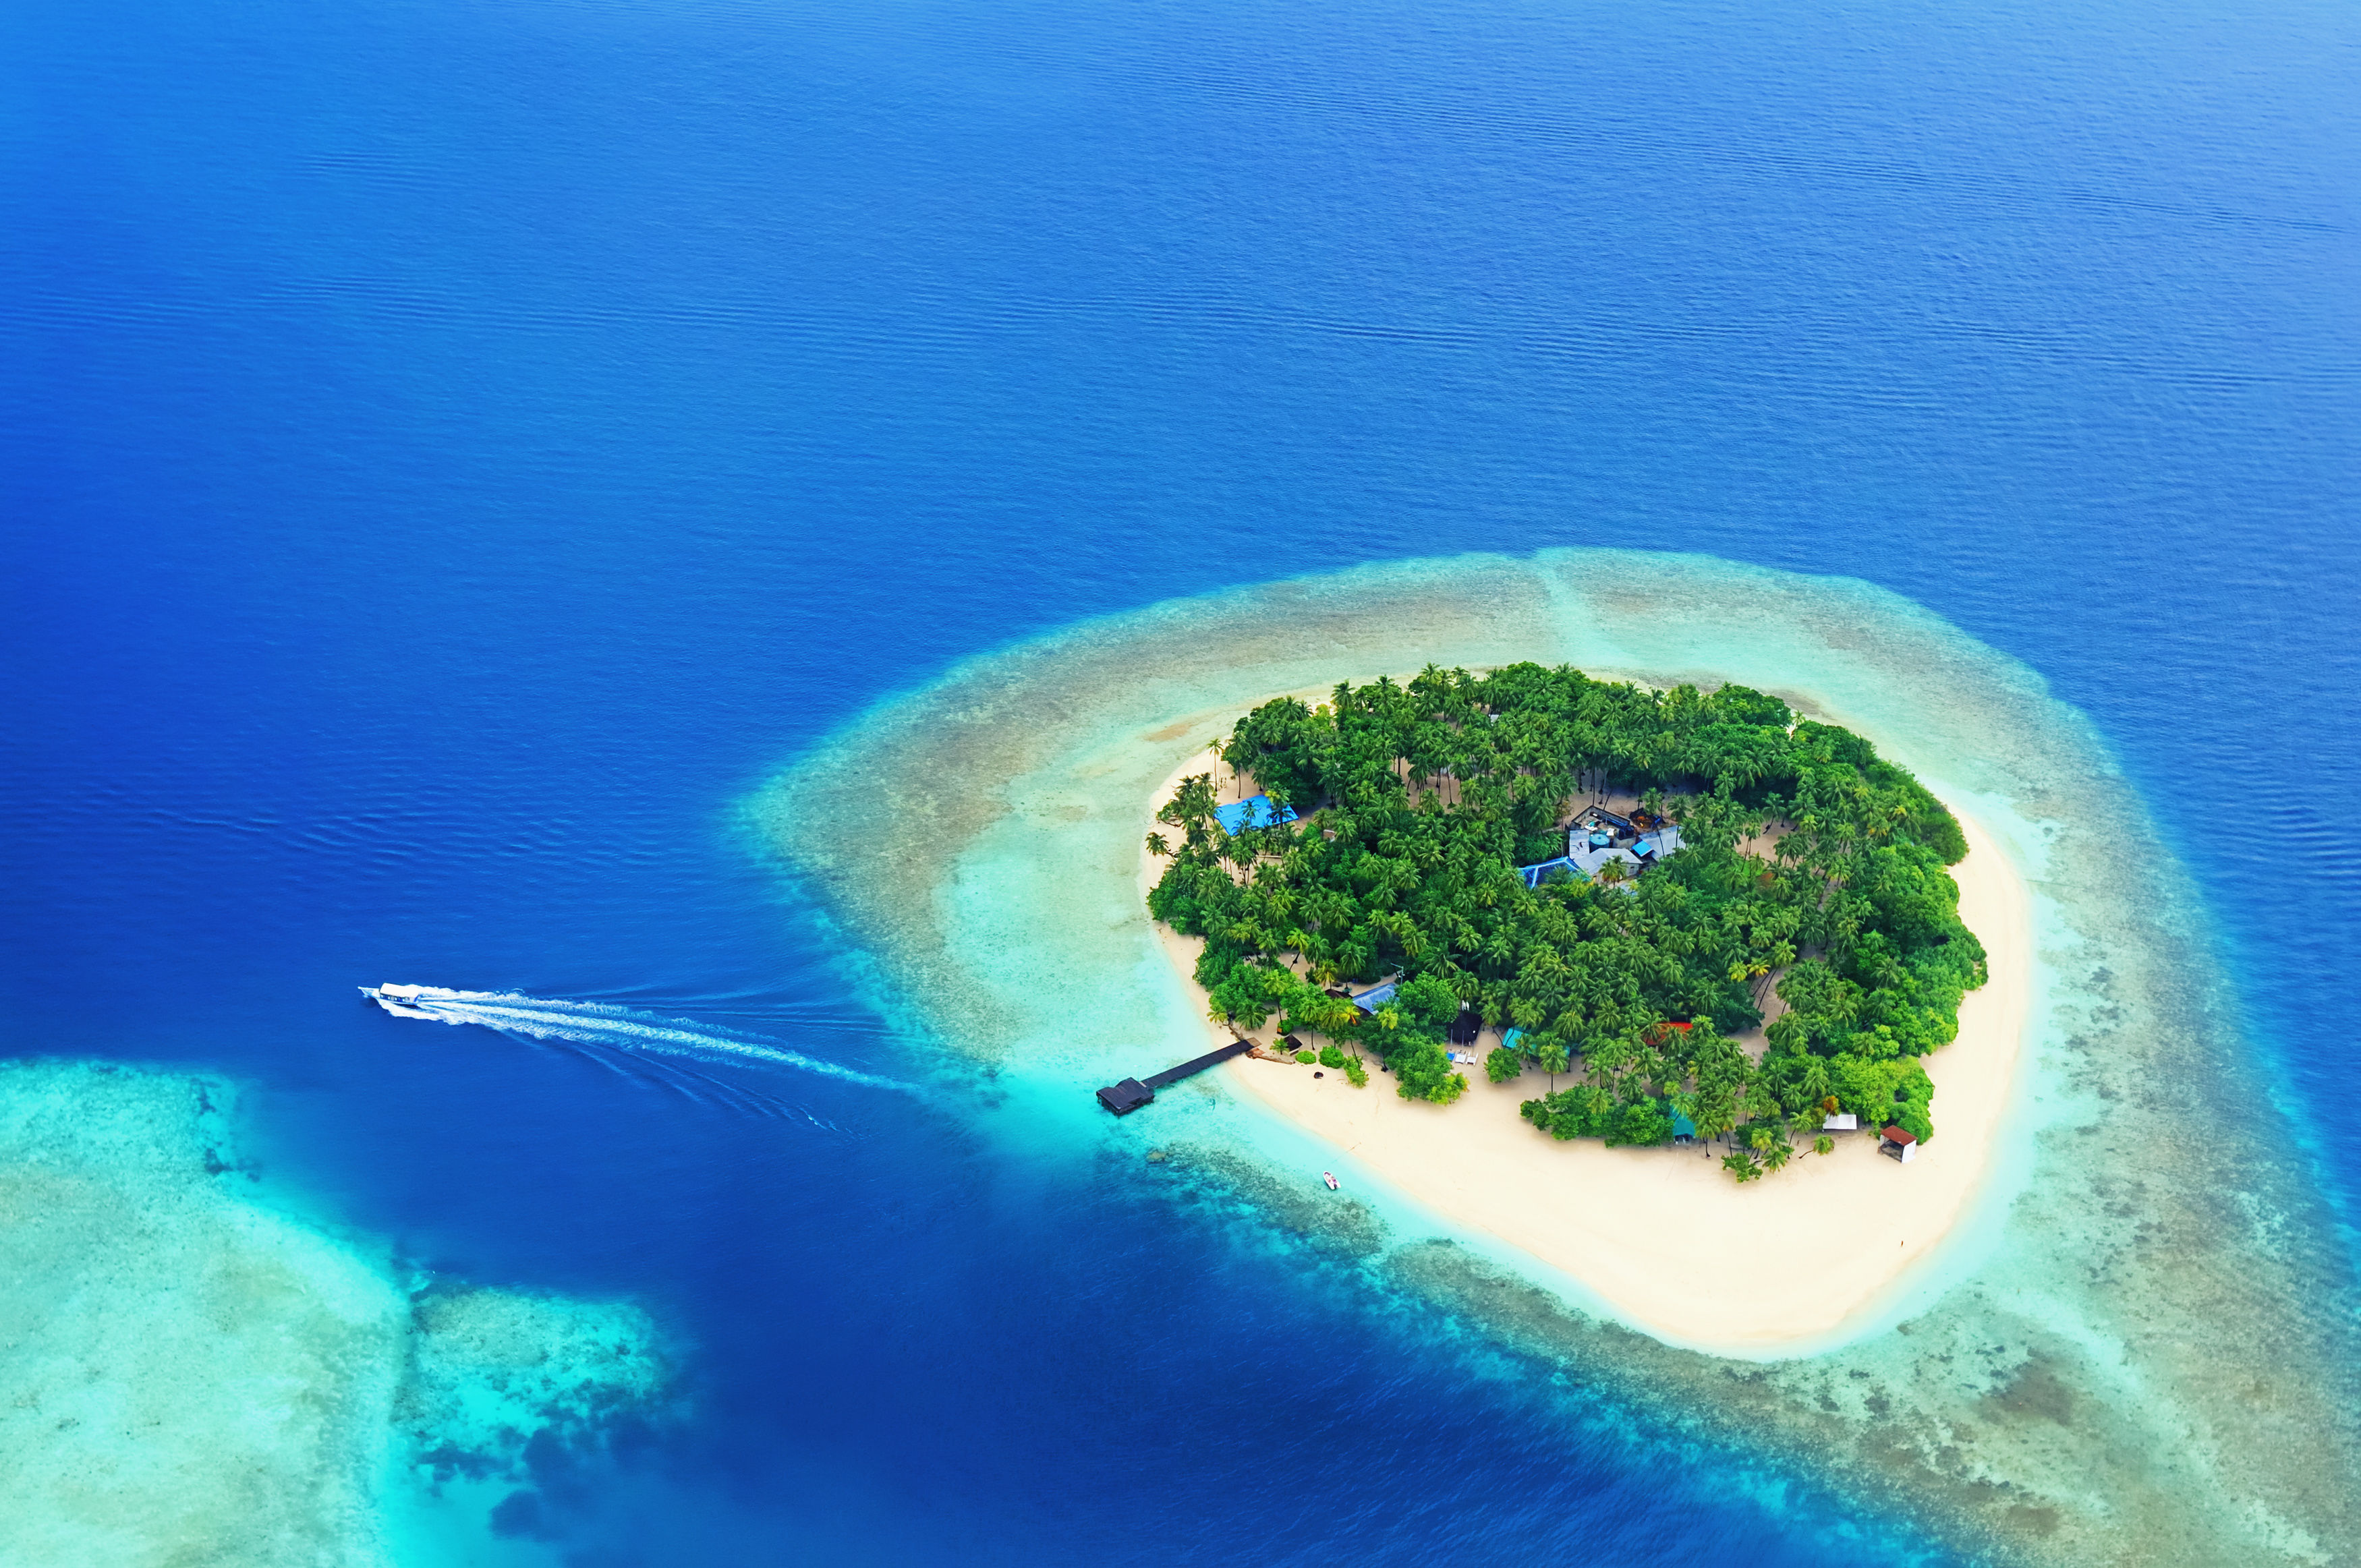 Aerial view of beautiful Maldives island covered in green trees and surrounded by white sand beaches, turquoise waters and with pier and speed boat. 